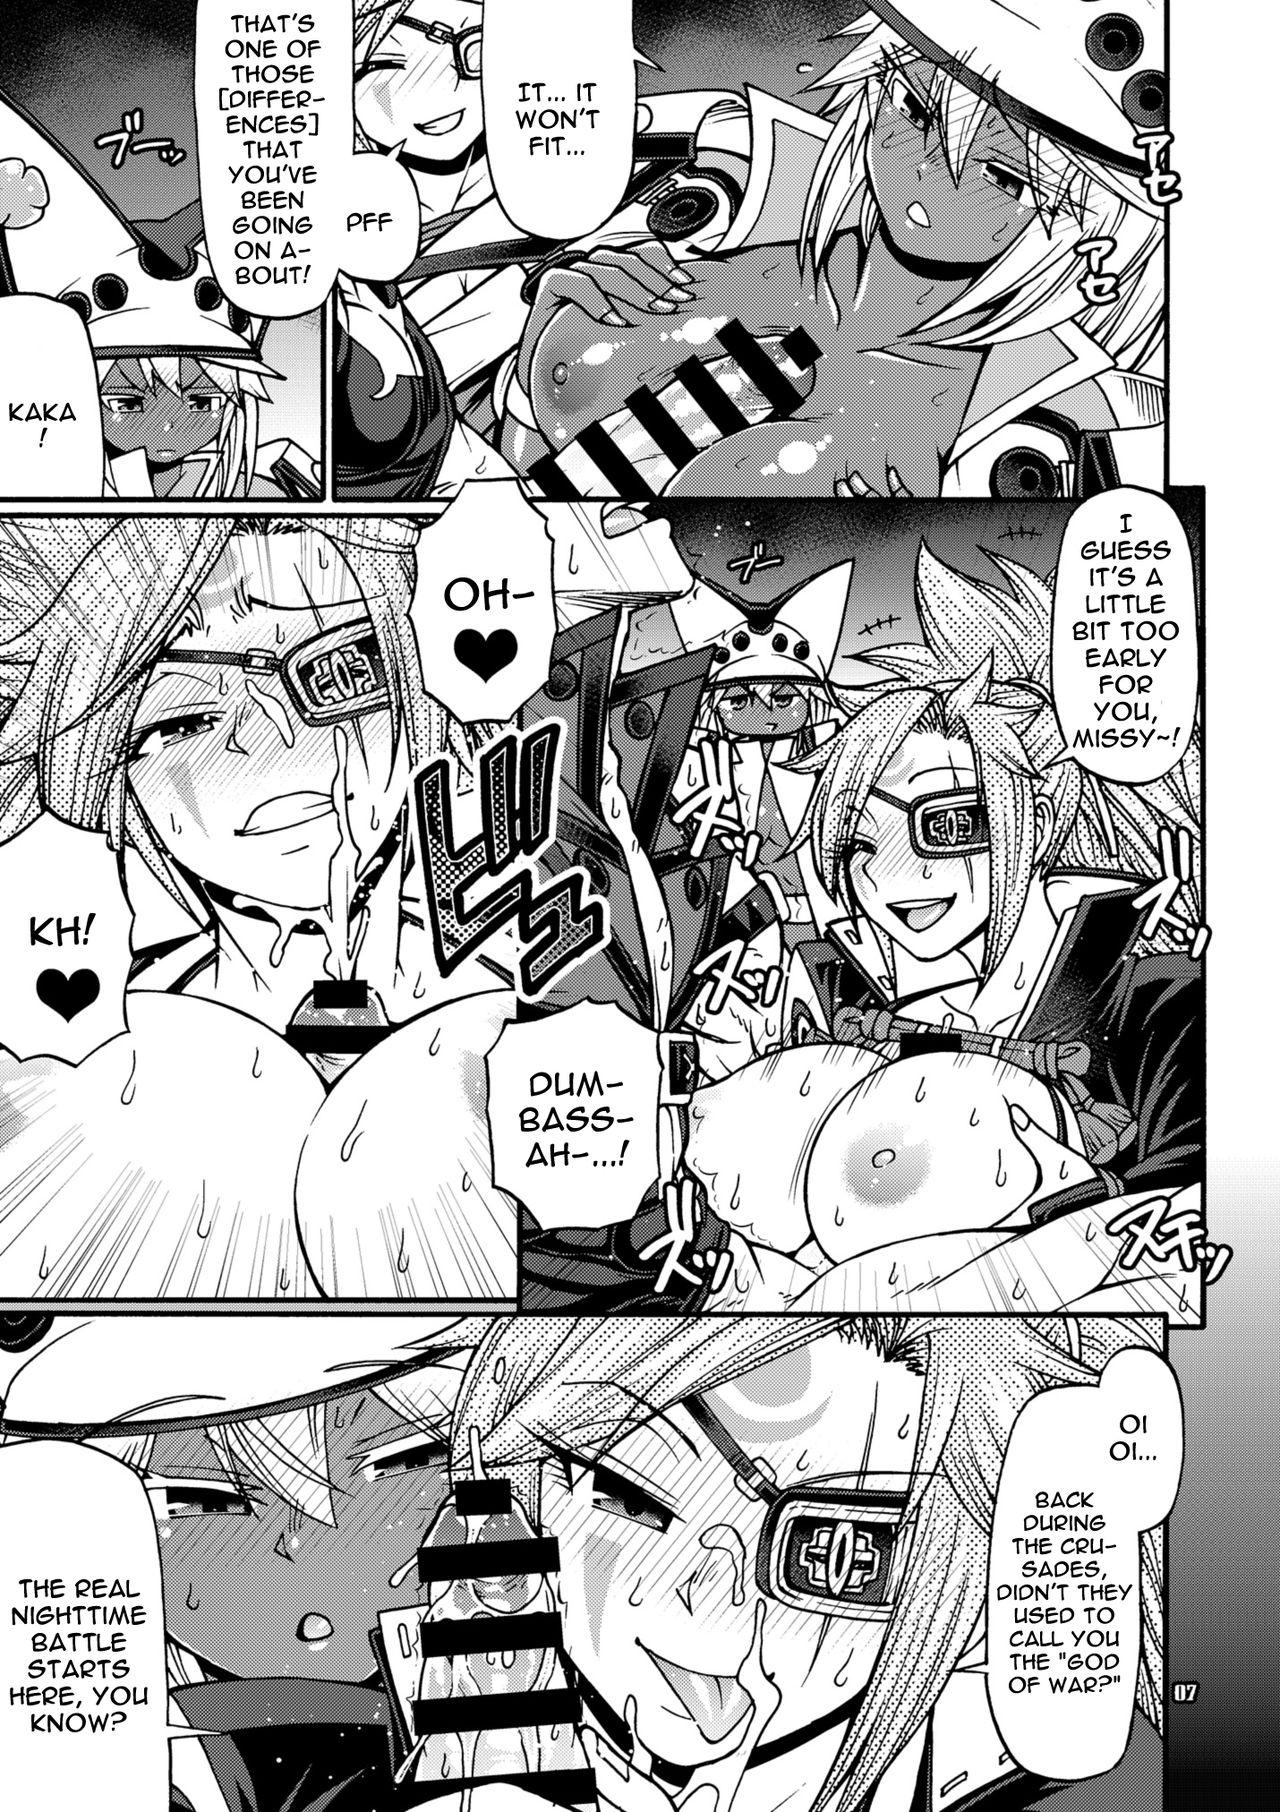 Condom Do What You Wanna Do - Guilty gear Gay Friend - Page 6